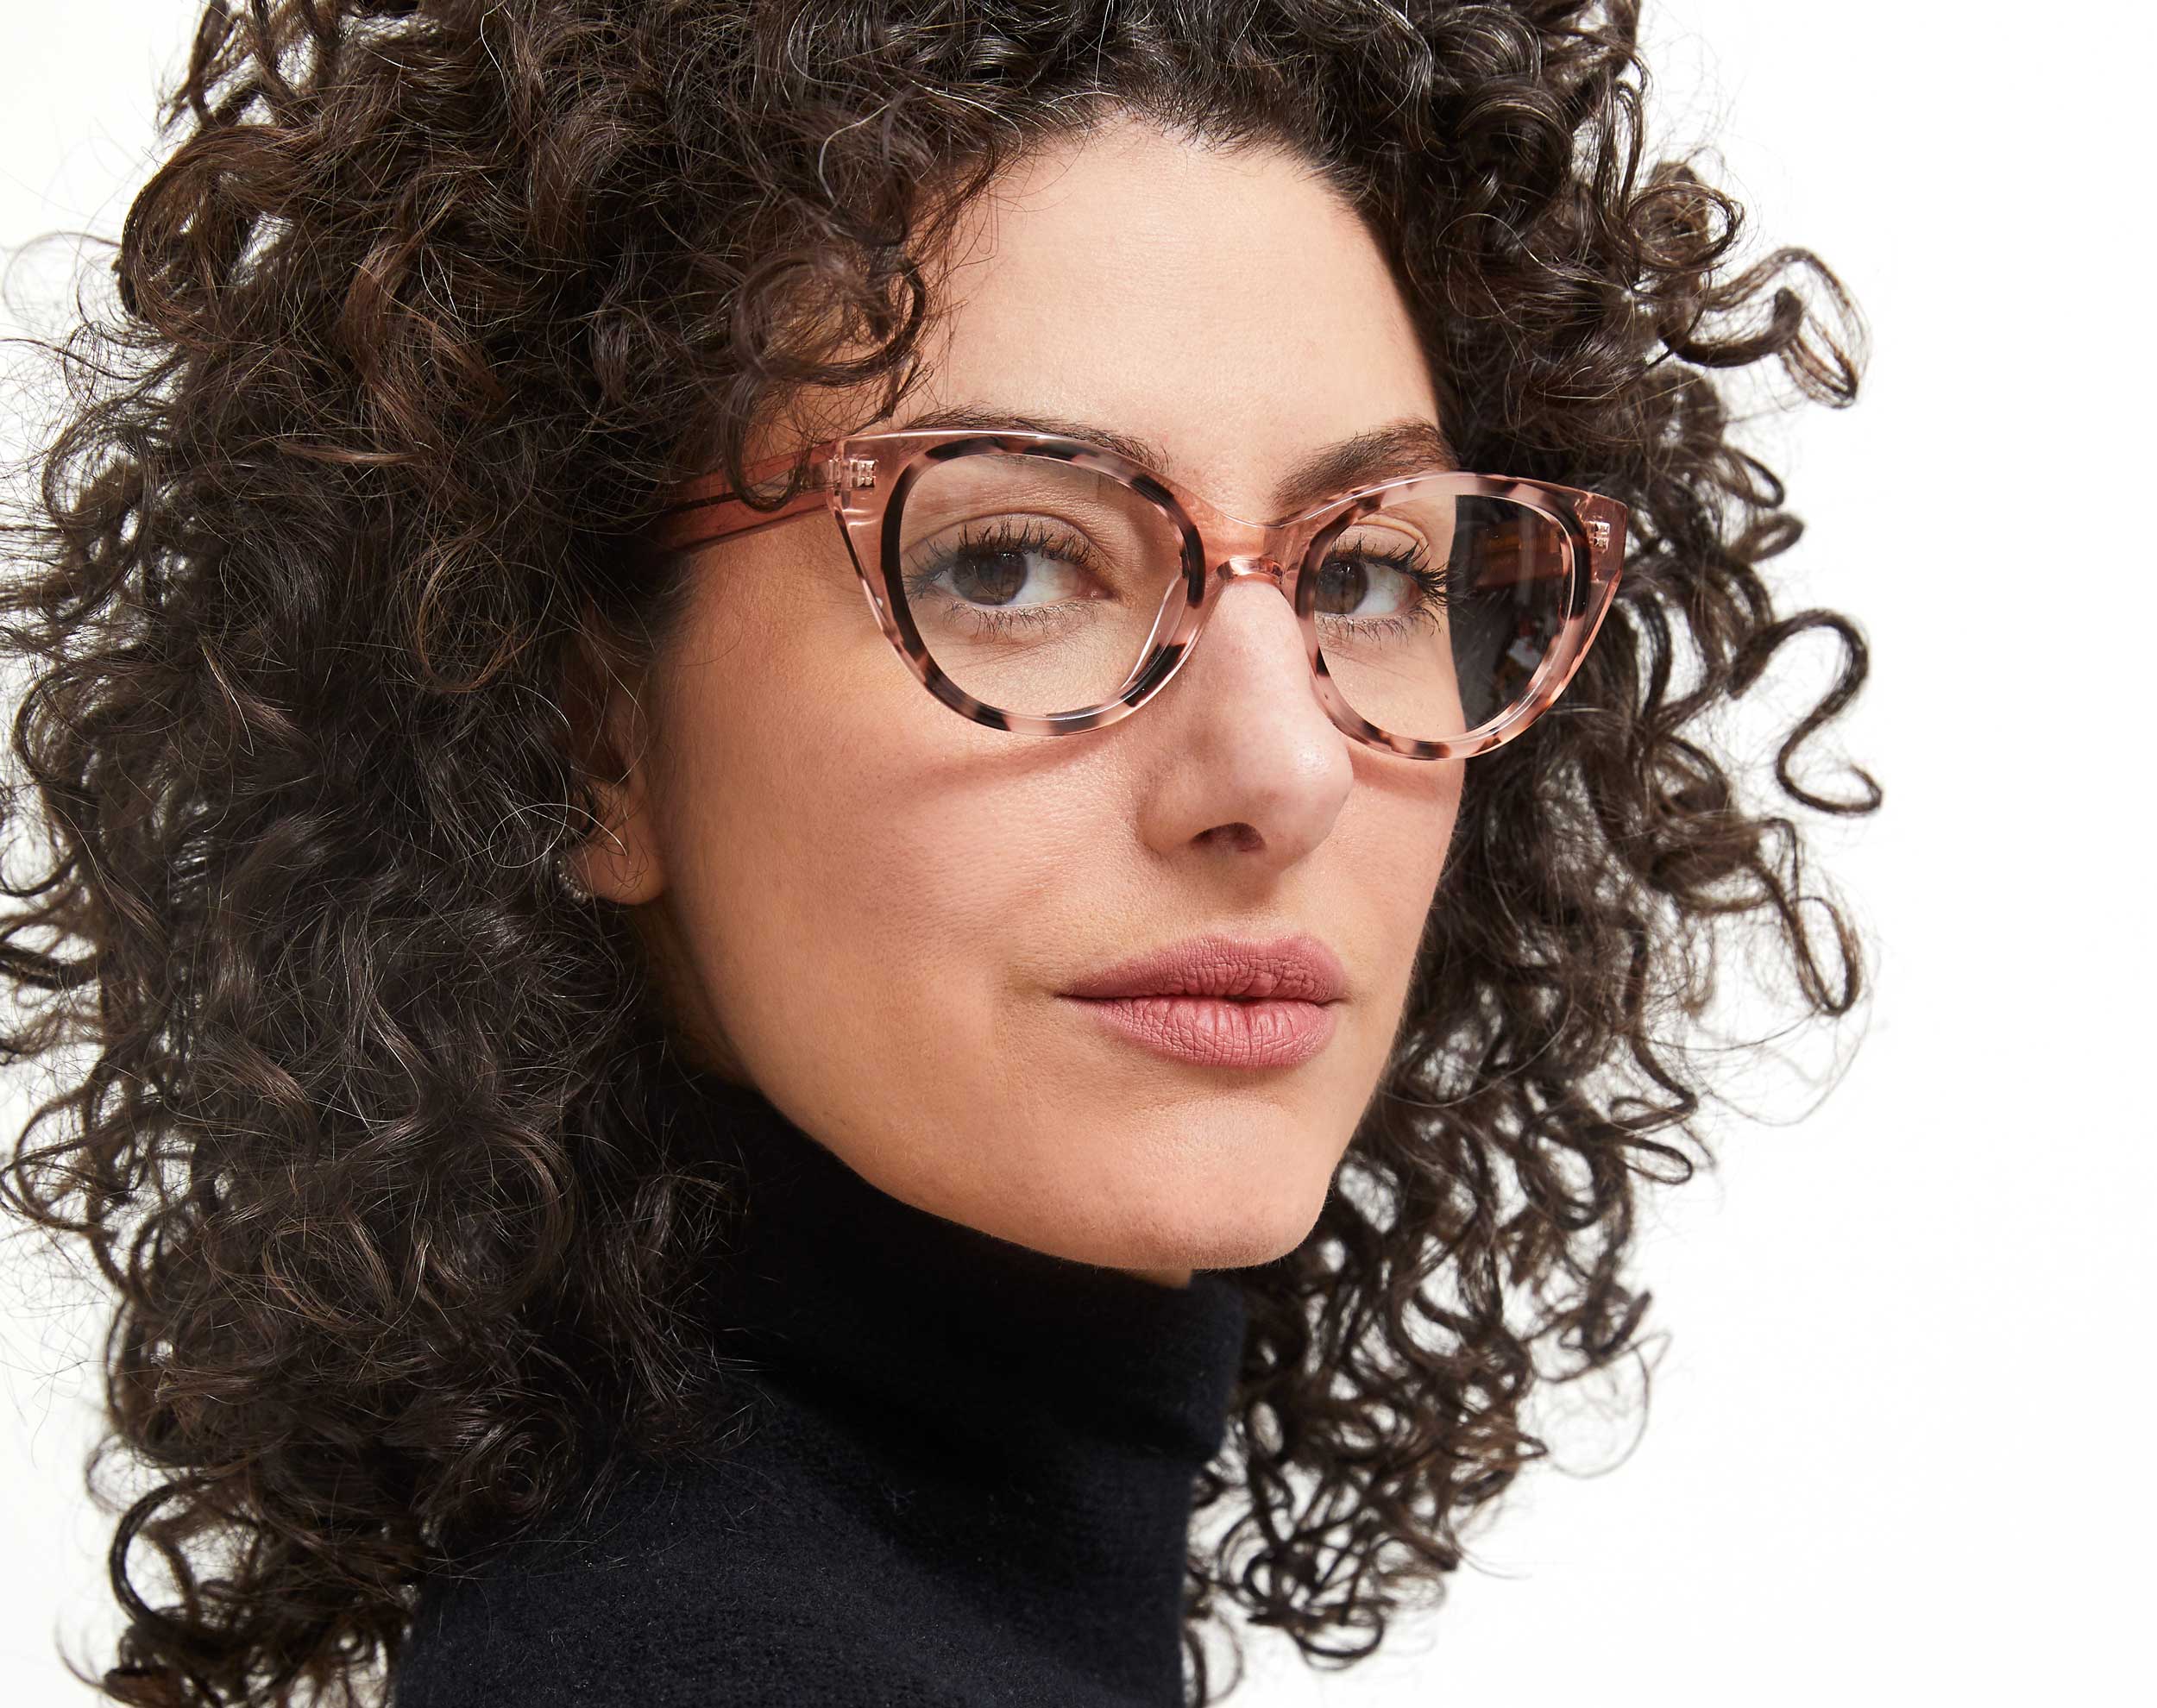 Photo of a man or woman wearing Colette Cherry Reading Glasses by French Kiwis